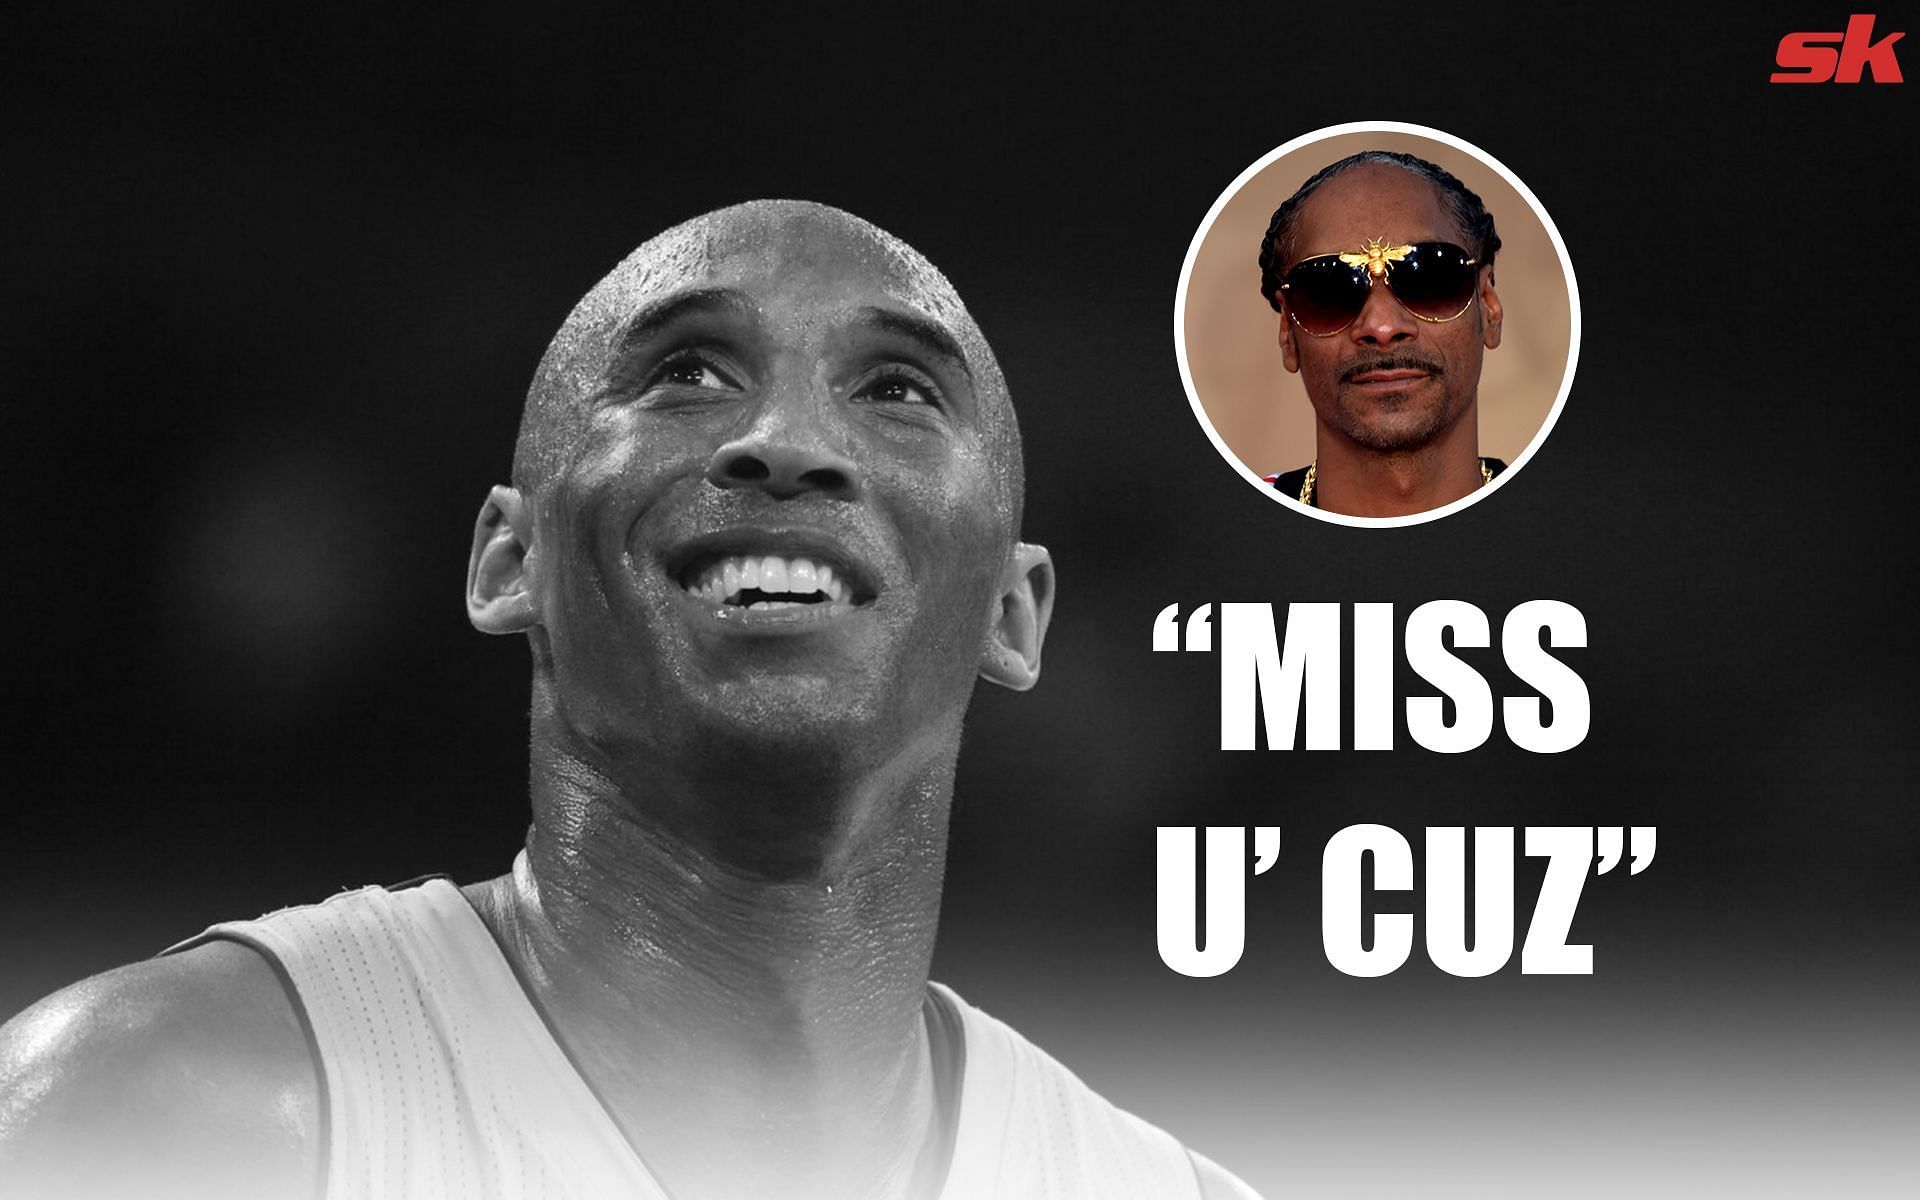 Snoop Dogg with a heartfelt Instagram post about LA Lakers legend Kobe Bryant